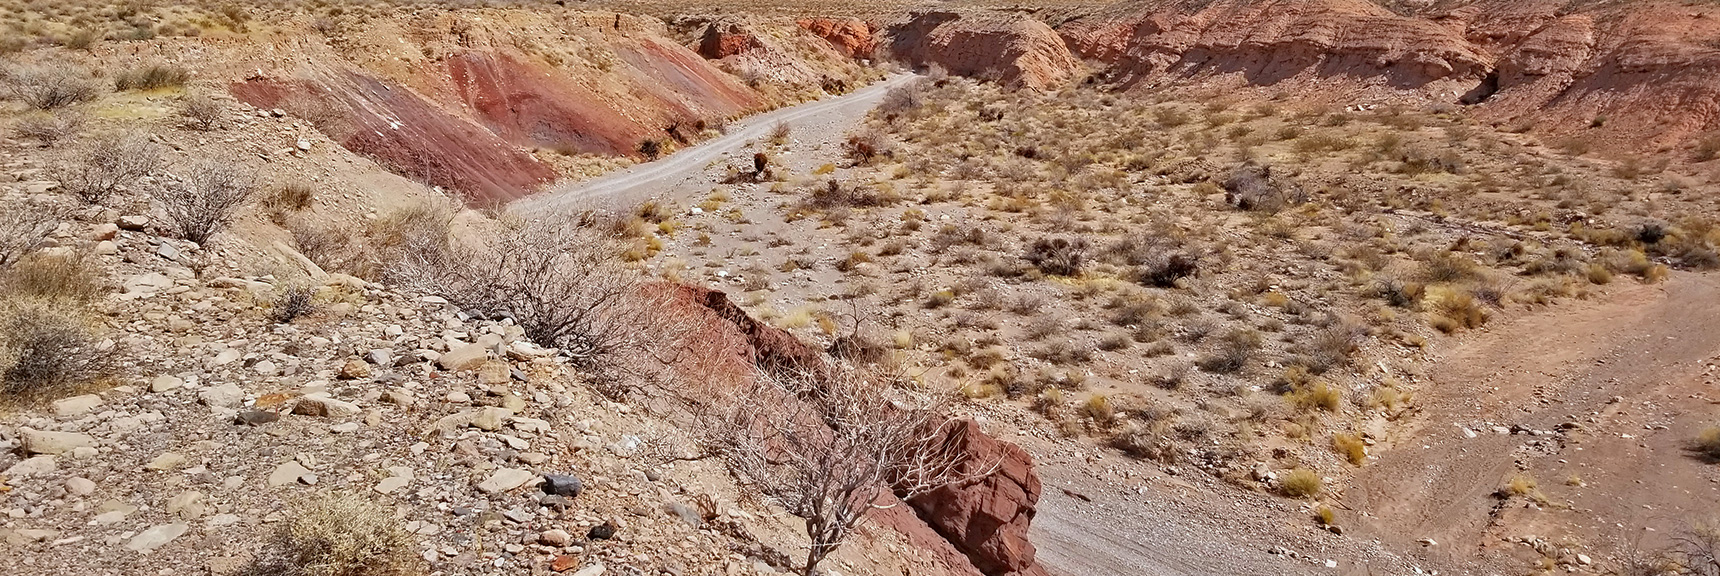 Canyon Route Intersects Main 4WD Road | Northern Bowl of Fire | Lake Mead National Recreation Area, Nevada